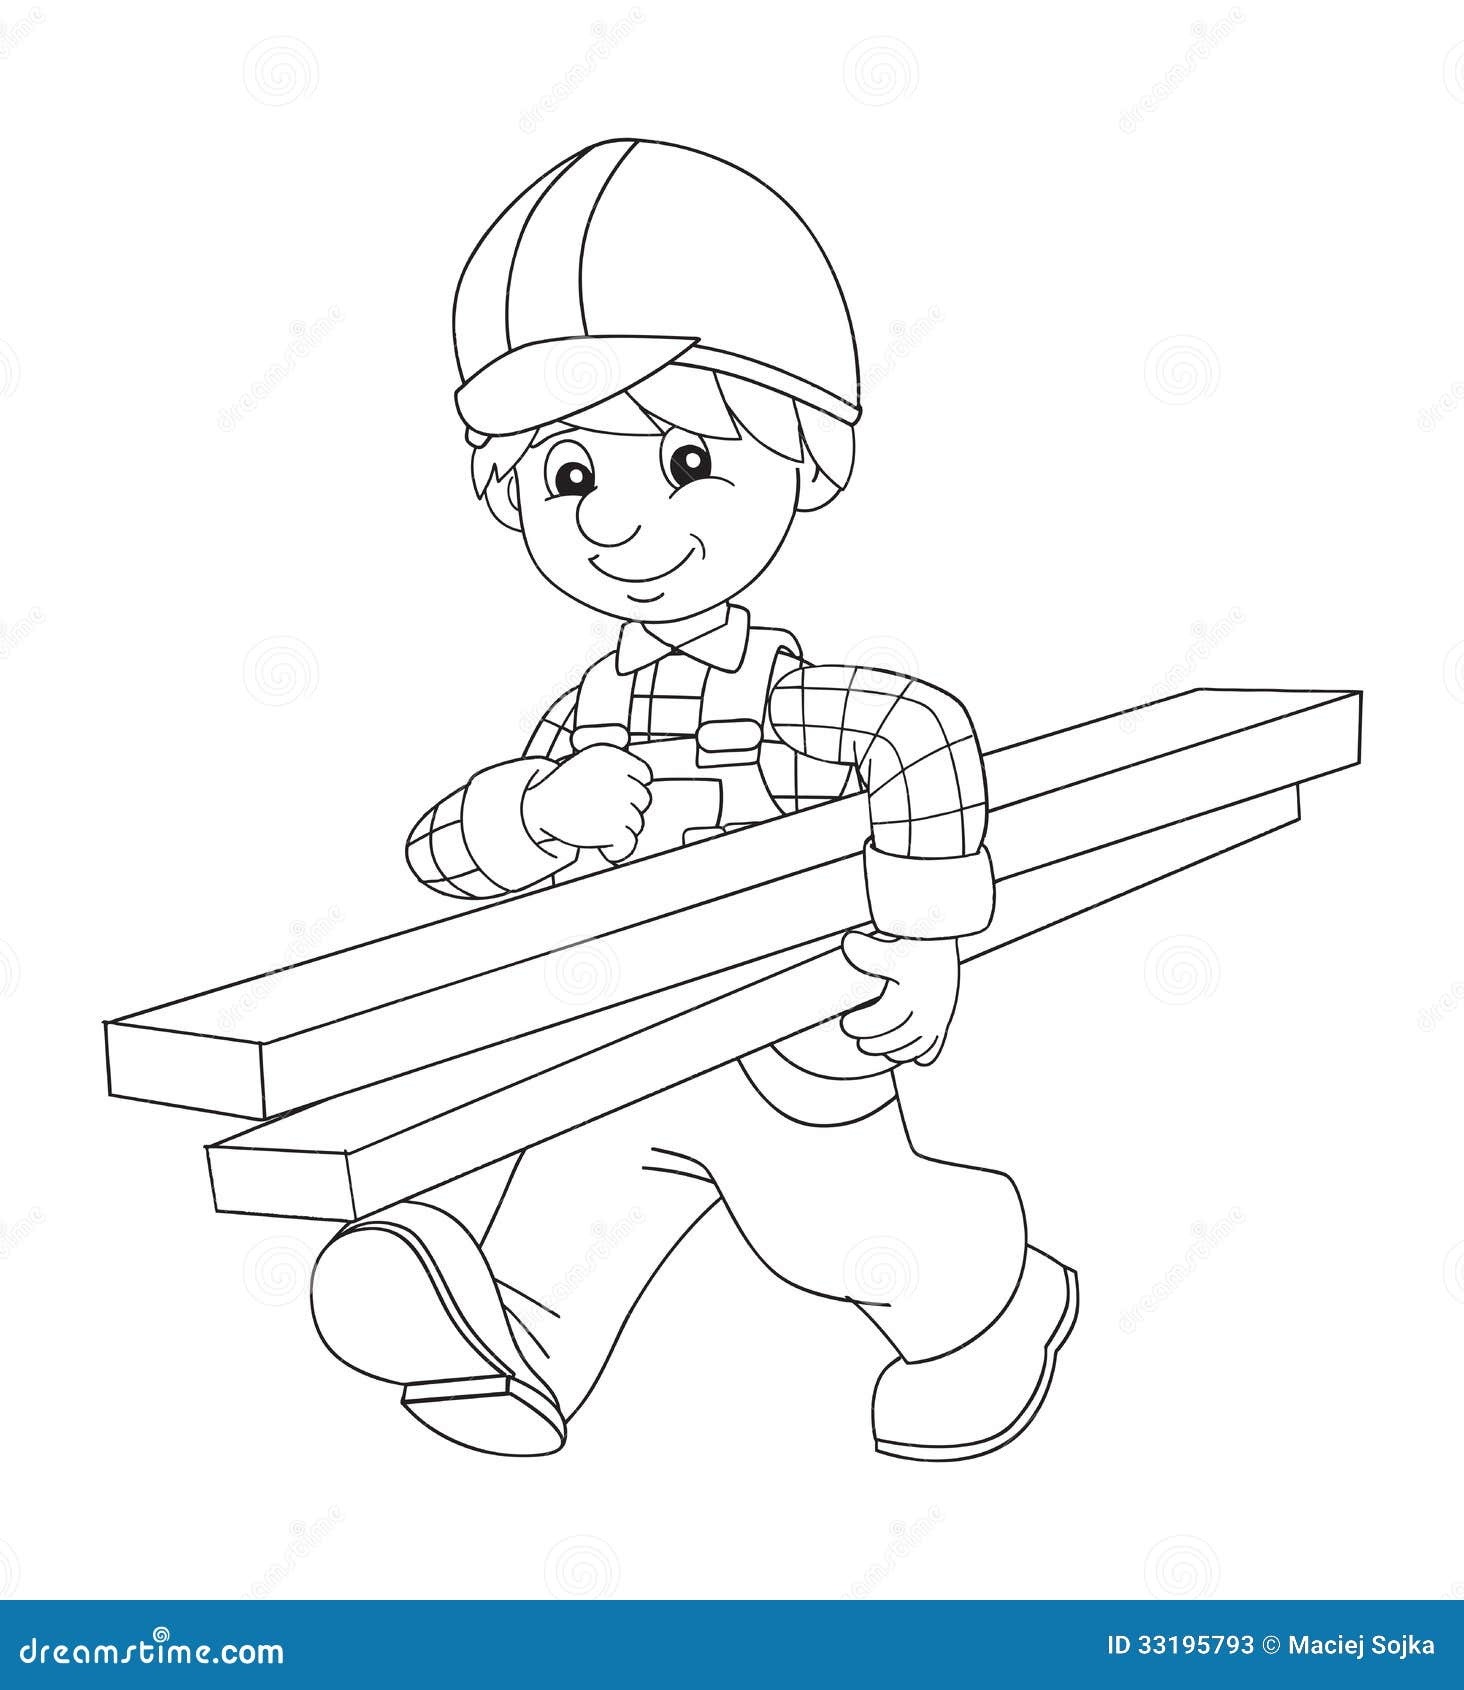 The Coloring Plate Construction Worker Illustration For The Children Stock Illustration Illustration Of Drawing Constructor 33195793